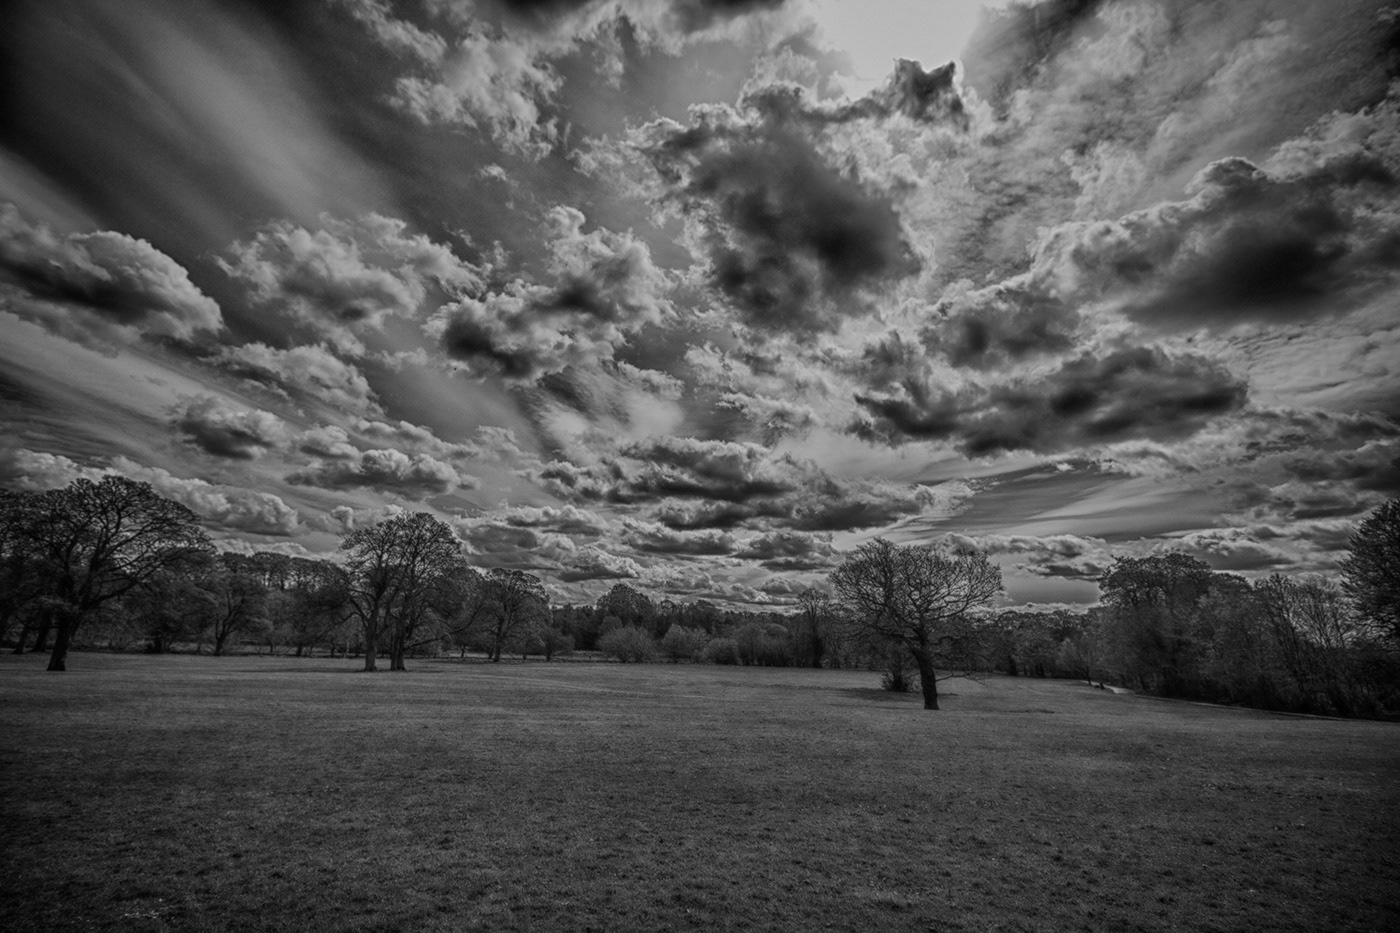 HDR Edited Lightroom CC DxO Photo Lab Photography  Black and white photography landscape photography Landscape HDR Edited